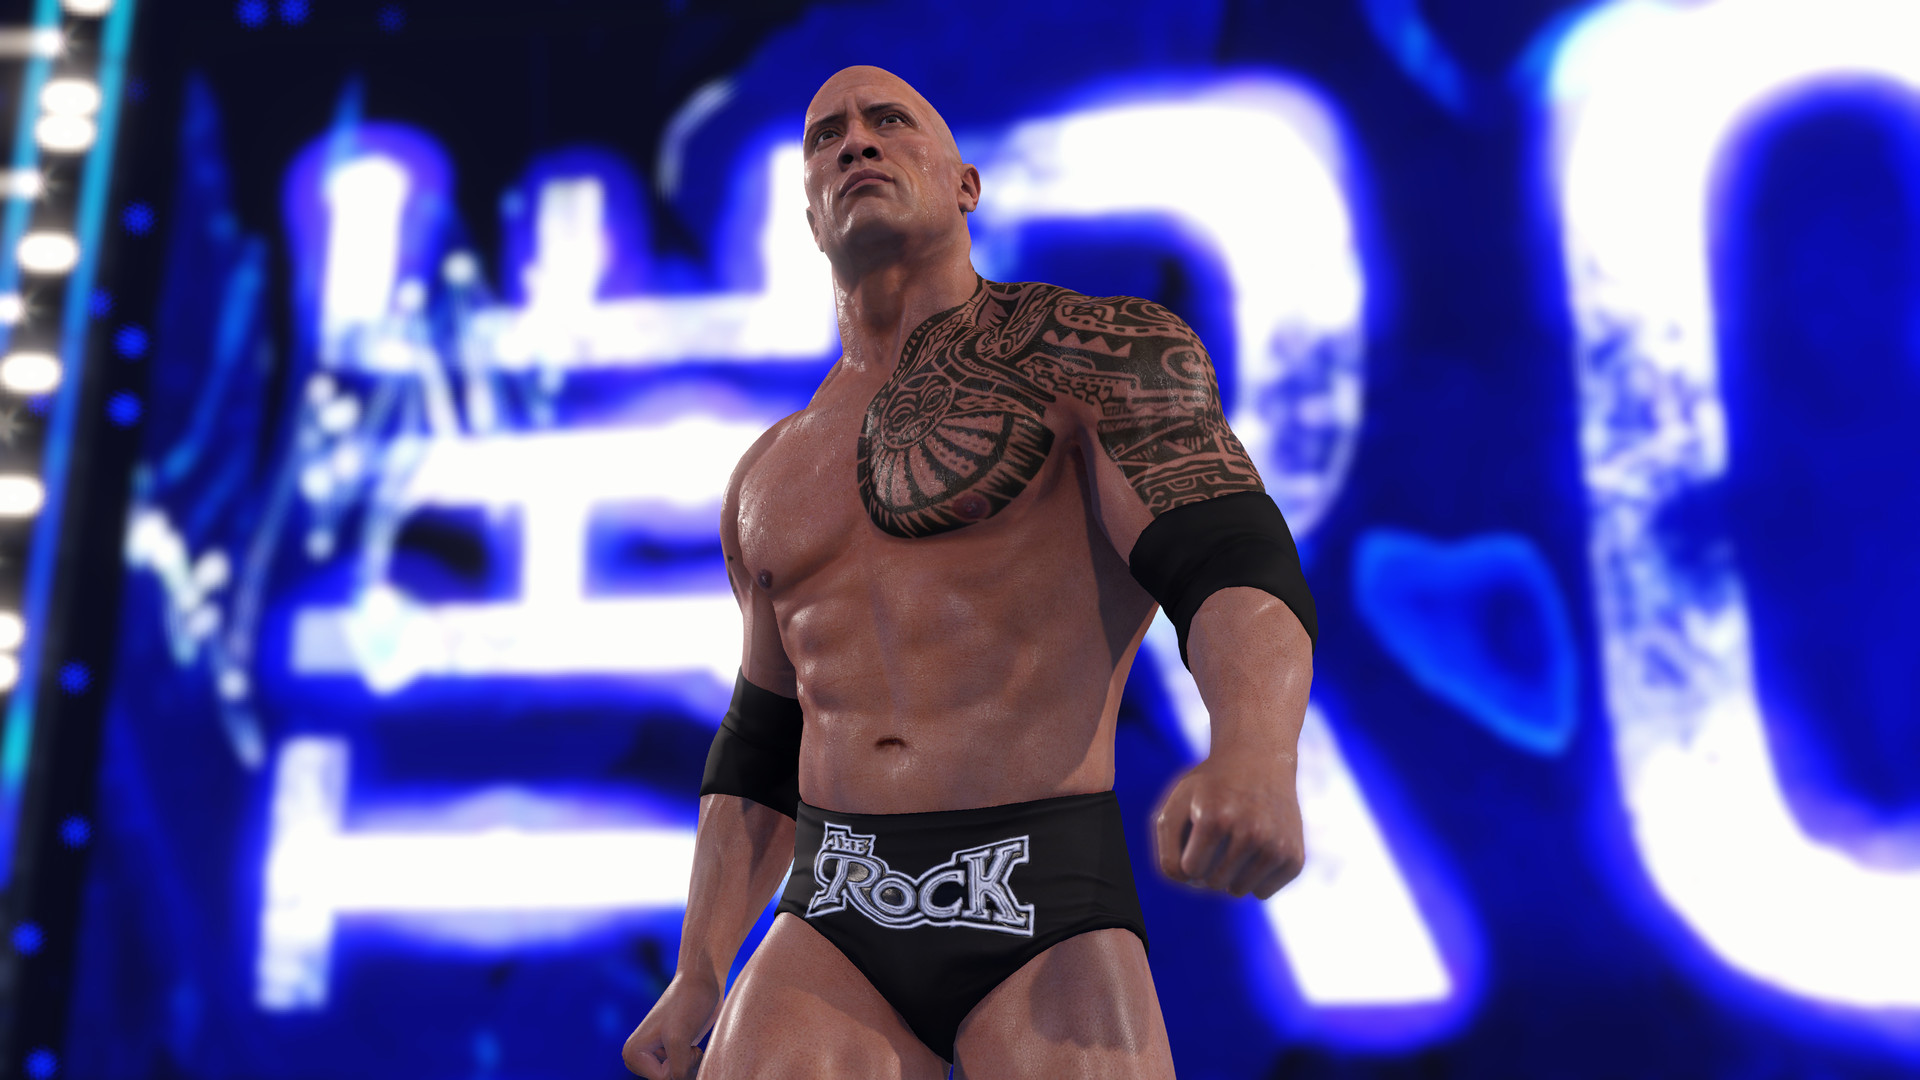 How to download WWE 2K22 for PC purchased on Steam